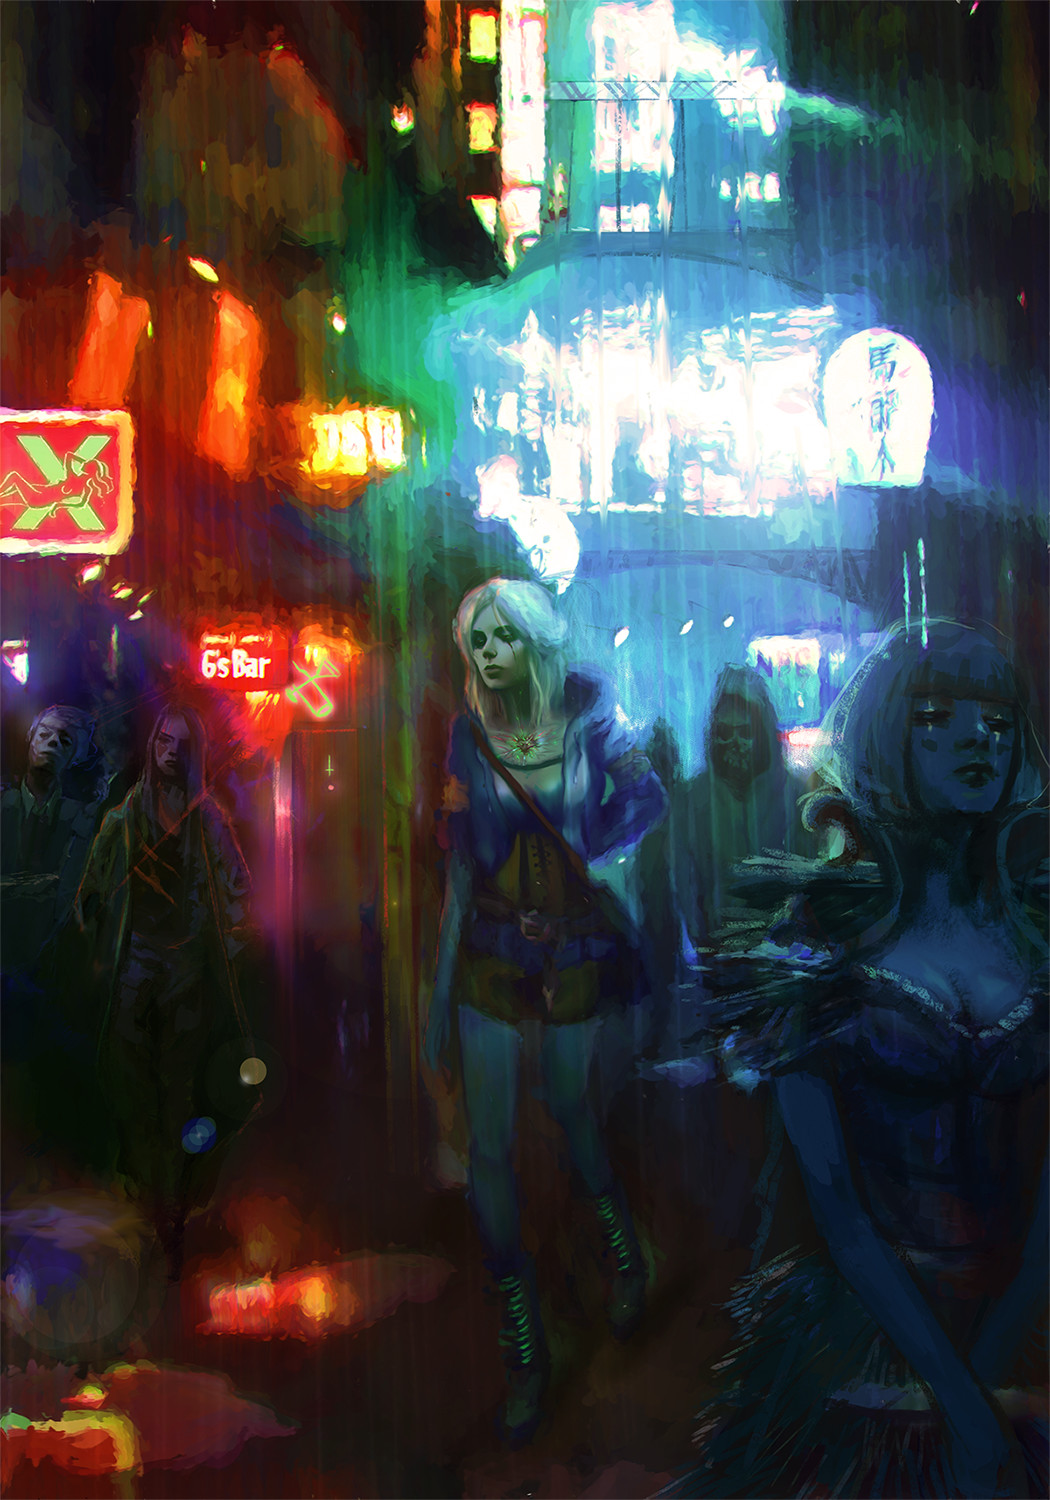 General 1050x1500 fantasy art artwork digital art video game art cyberpunk The Witcher The Witcher 3: Wild Hunt Cirilla Fiona Elen Riannon video games neon portrait display sign city cleavage bar walking video game girls video game characters Marty Zych